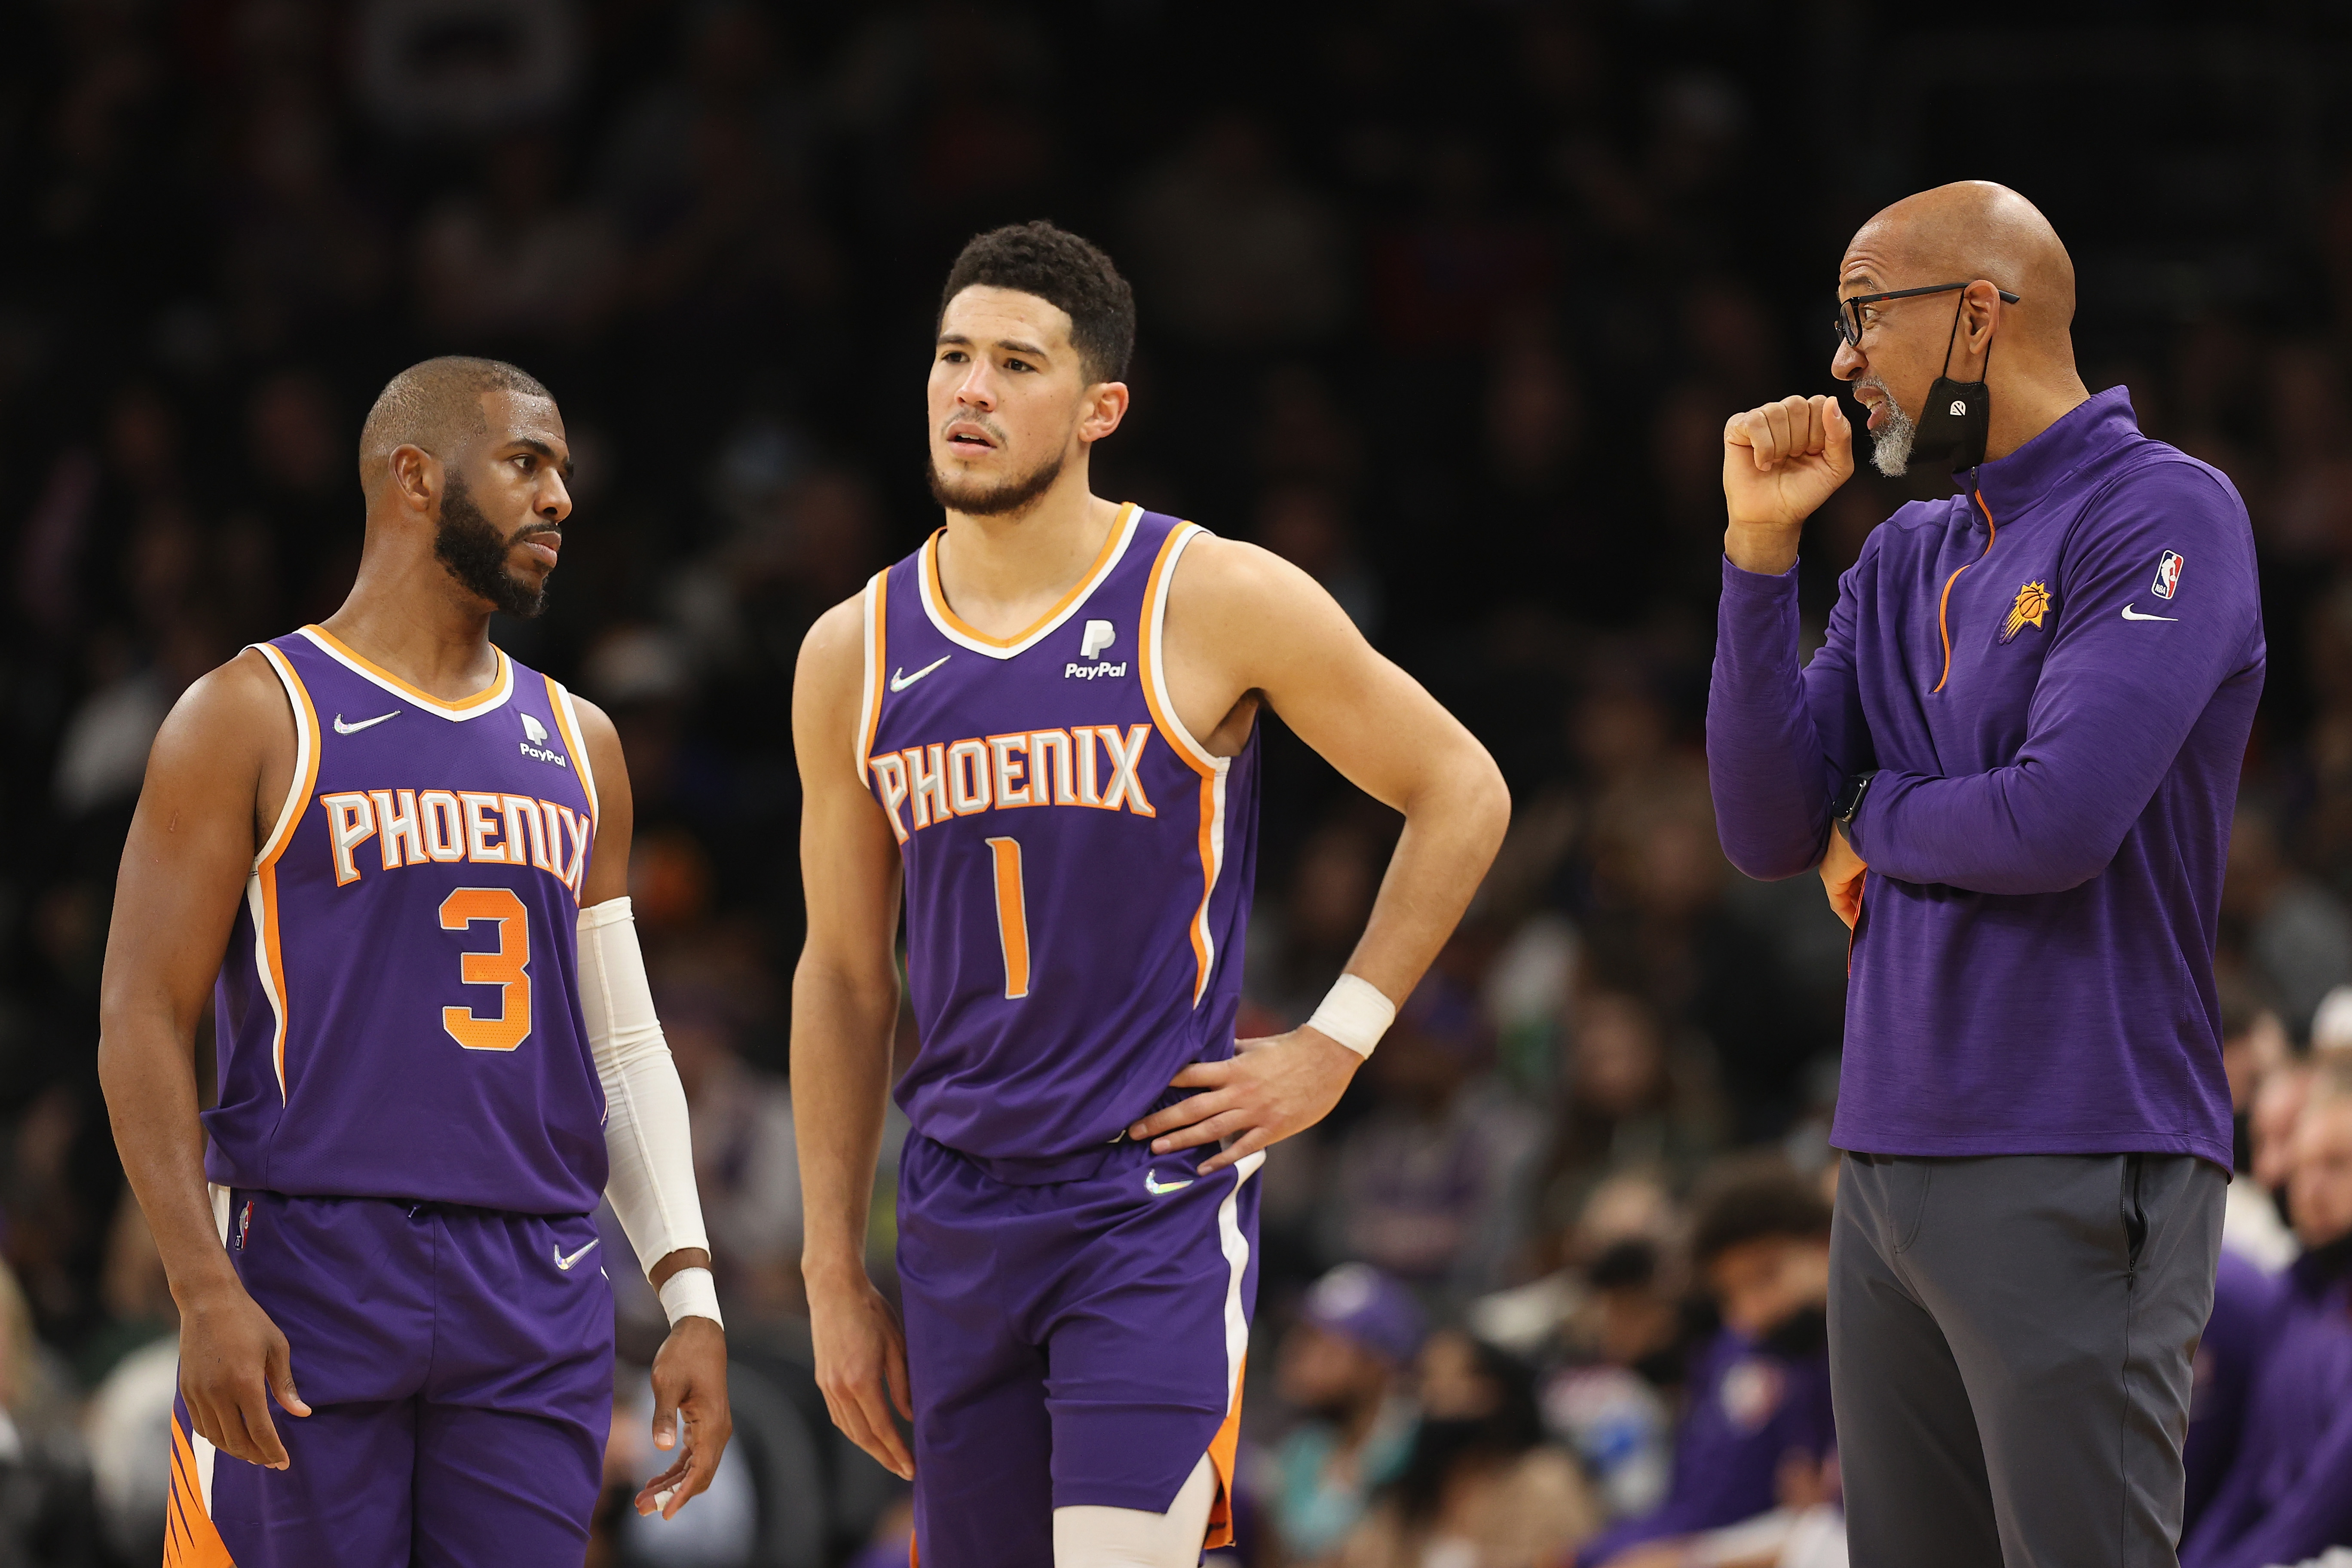 L-R: Chris Paul, Devin Booker, and Monty Williams of the Phoenix Suns talk during a game against the Charlotte Hornets